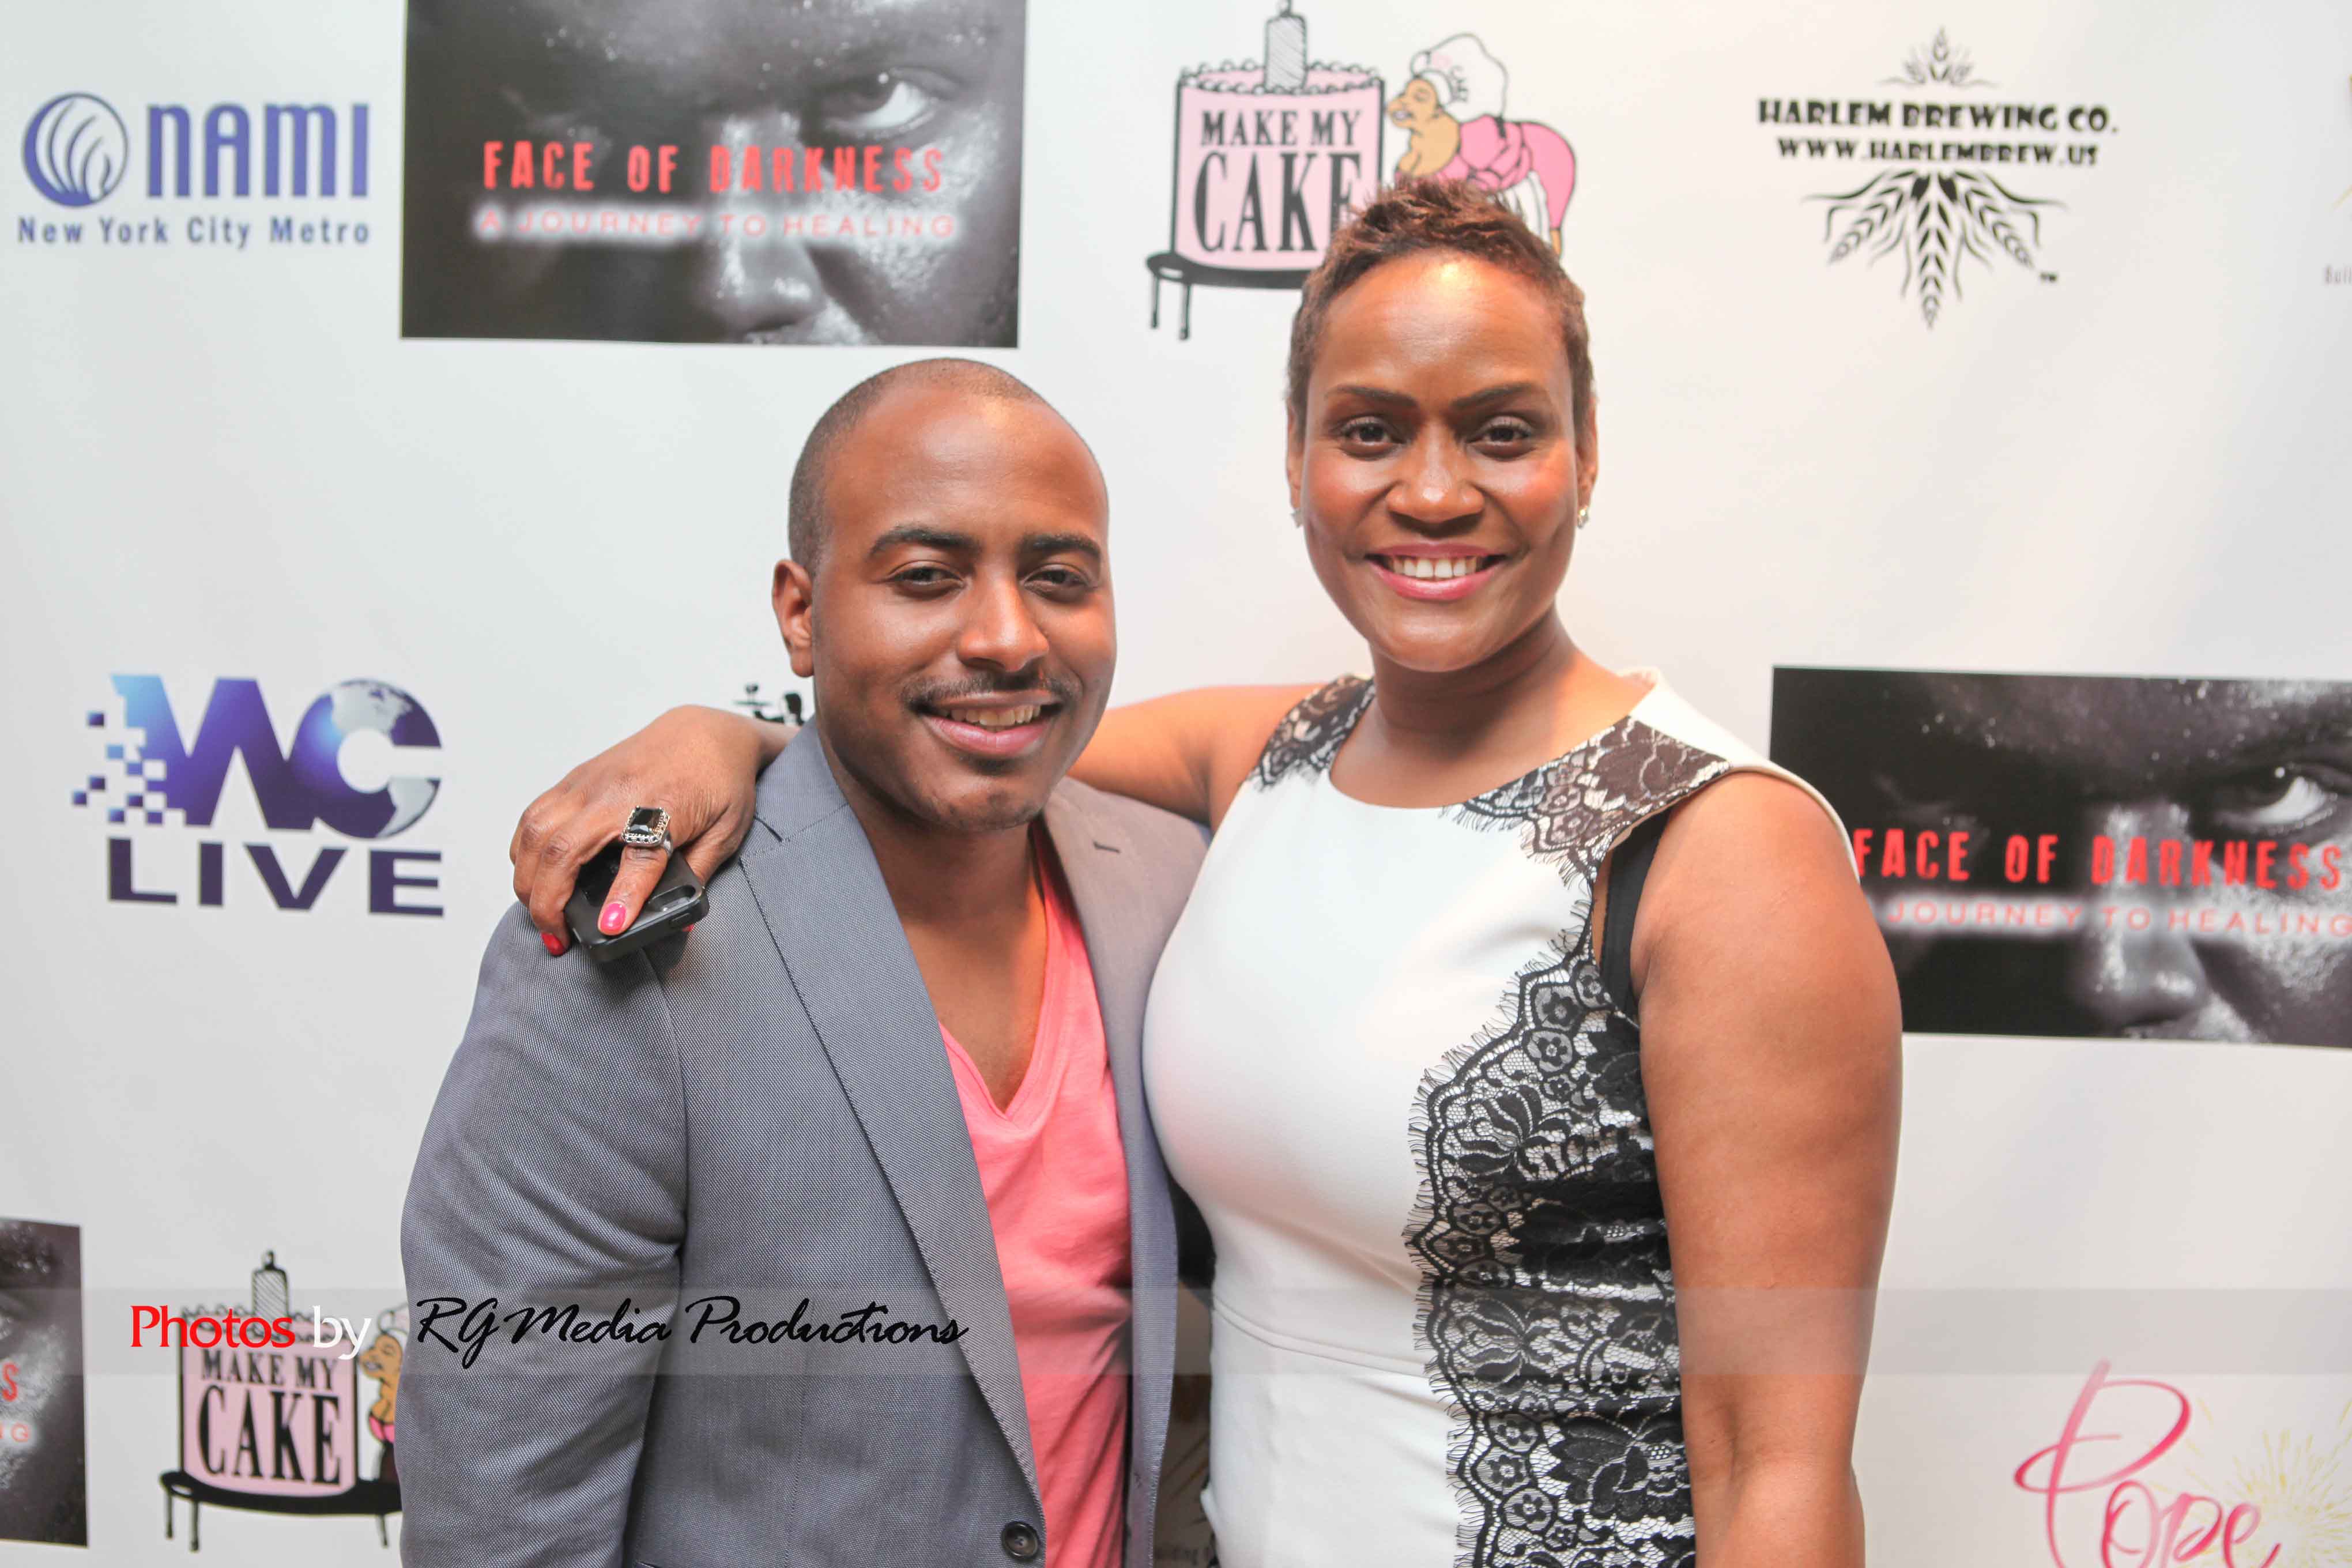 KT Nelson and Squeaky Moore @ Face of Darkness Event